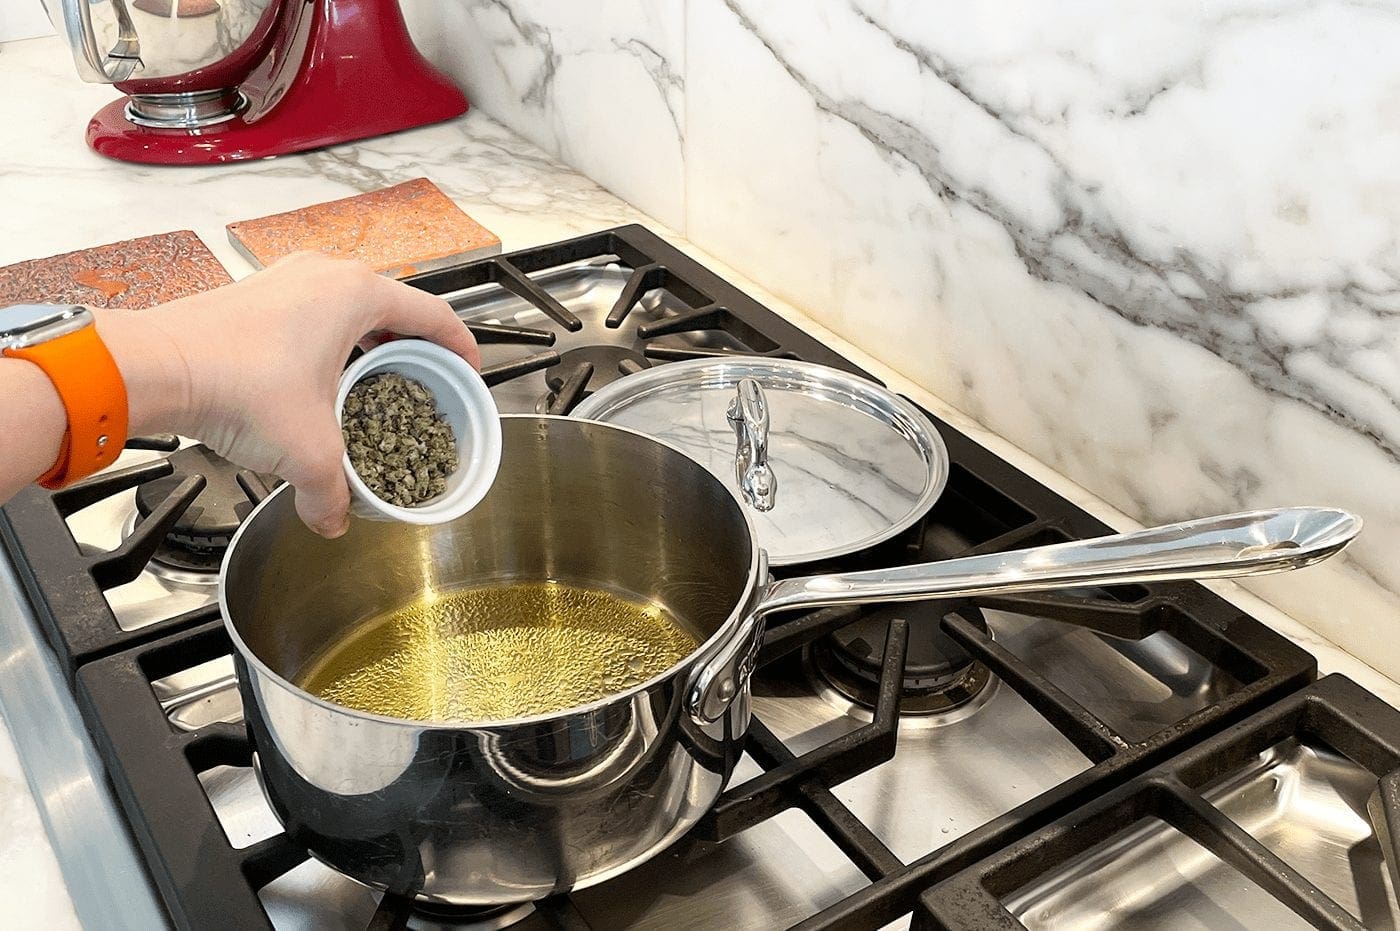 Make cannabutter right on your stovetop